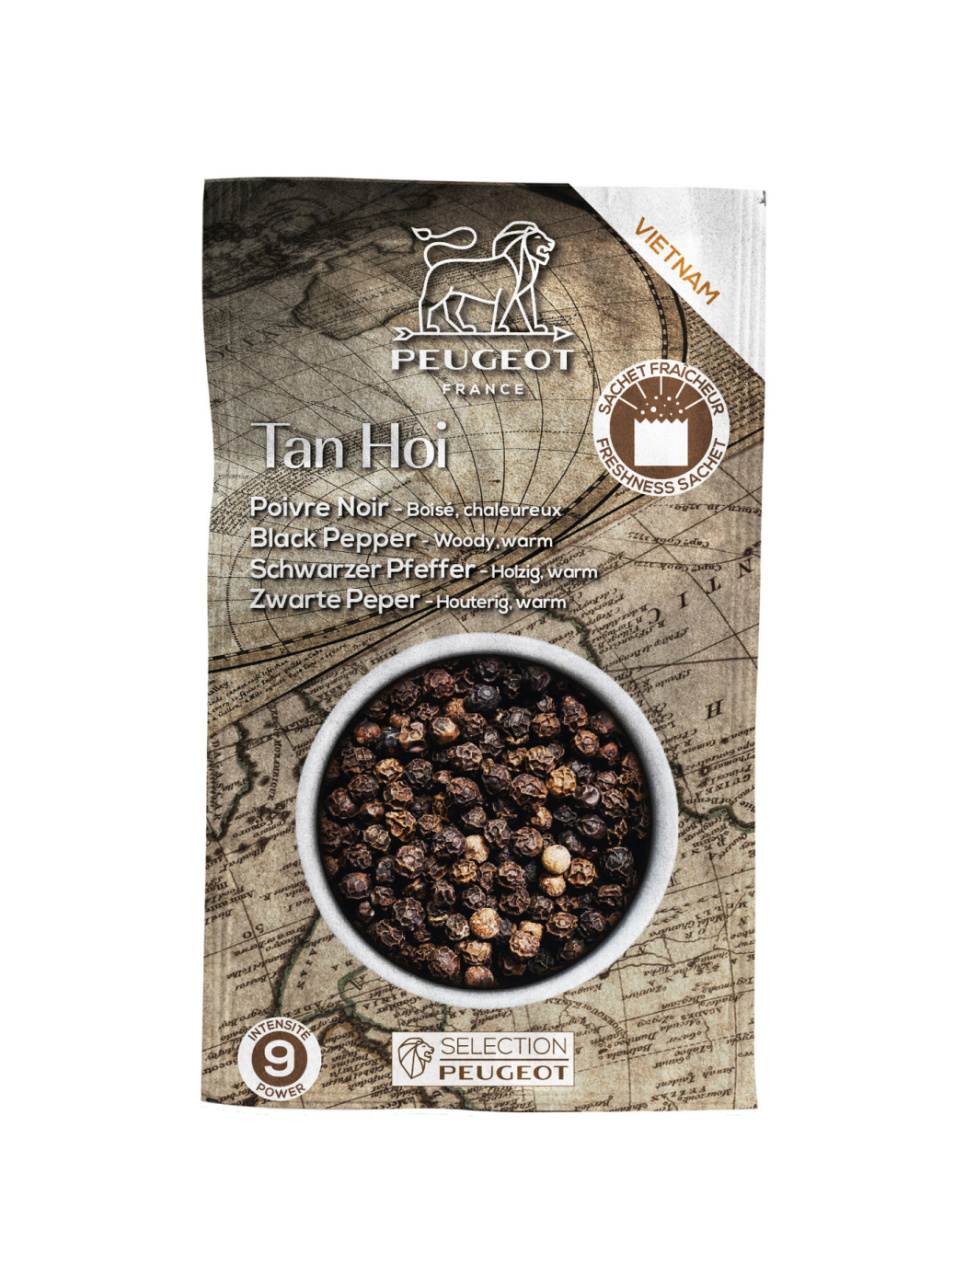 Tan hoi black pepper, 7x20g - Peugeot in the group Cooking / Spices & Flavourings / Pepper at KitchenLab (1090-28197)